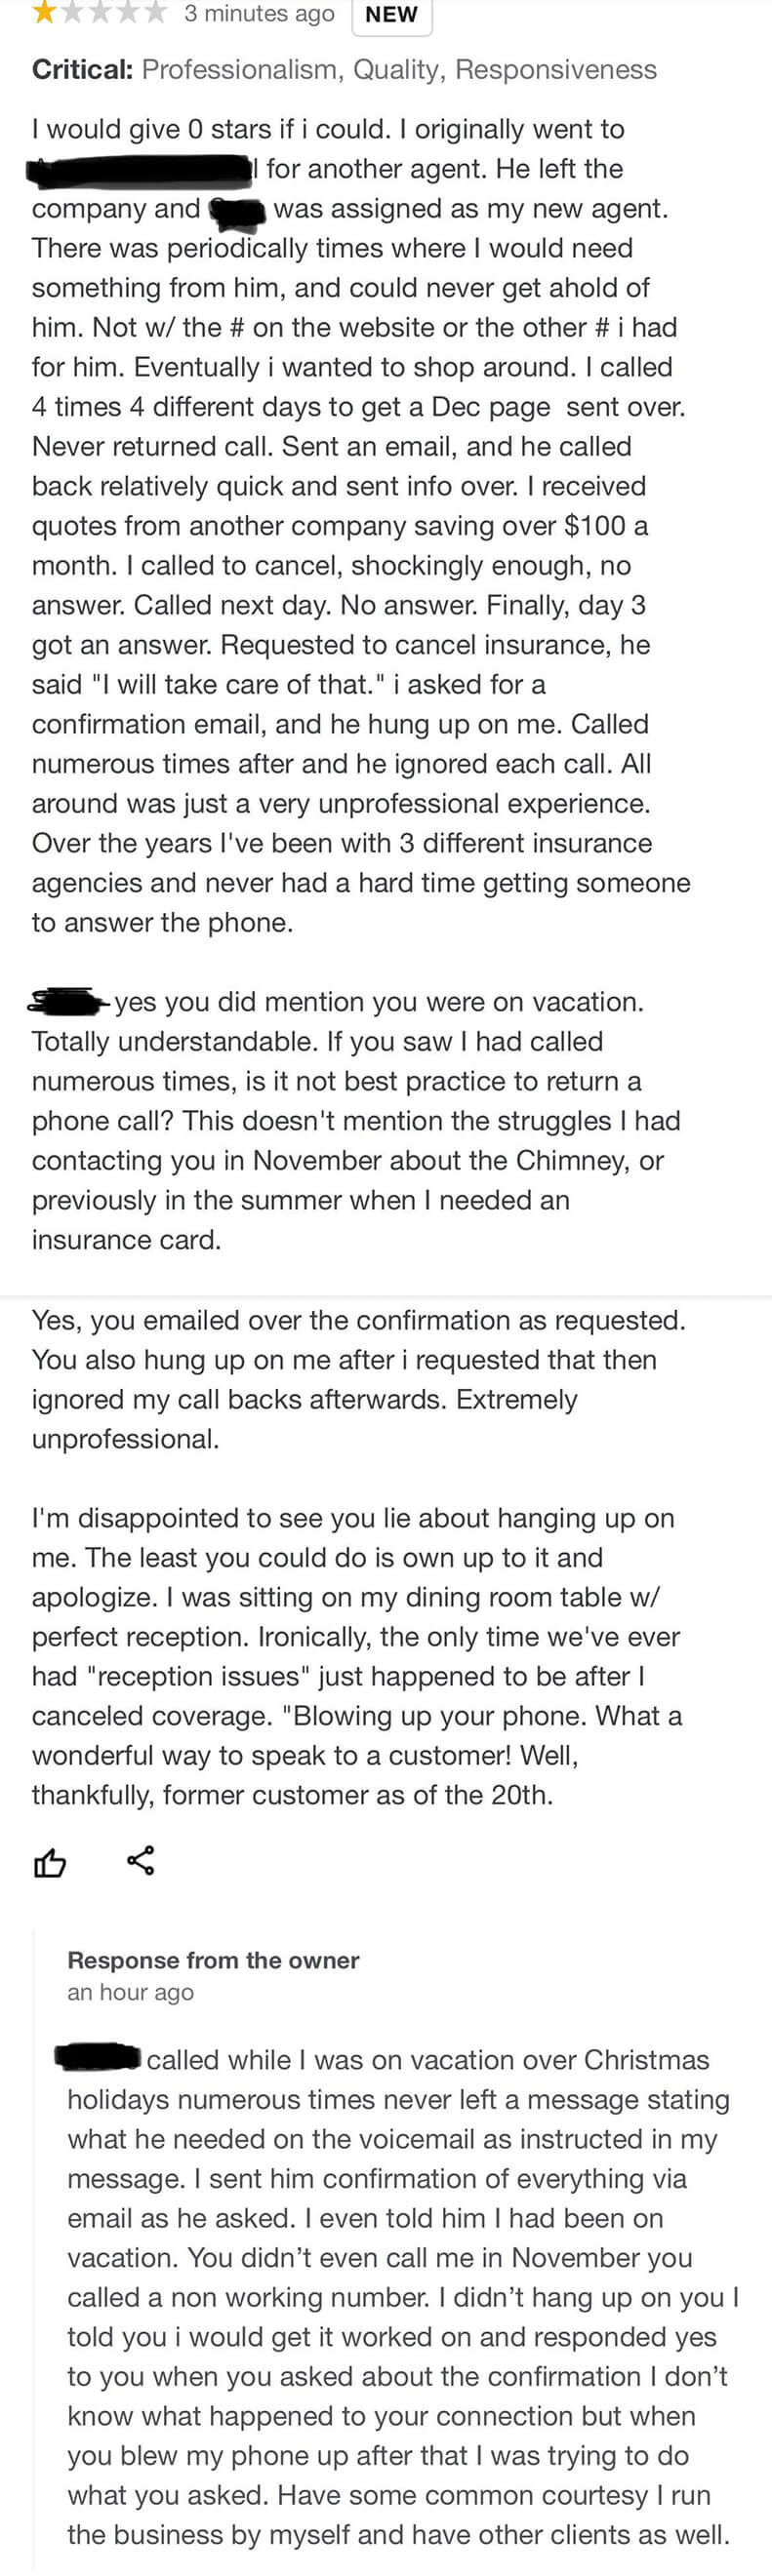 one star review complaining about an agent not replying to calls for four days in december, and later hanging up on them— the owner replied to say he was on christmas vacation, and that he didn&#x27;t hang up on them